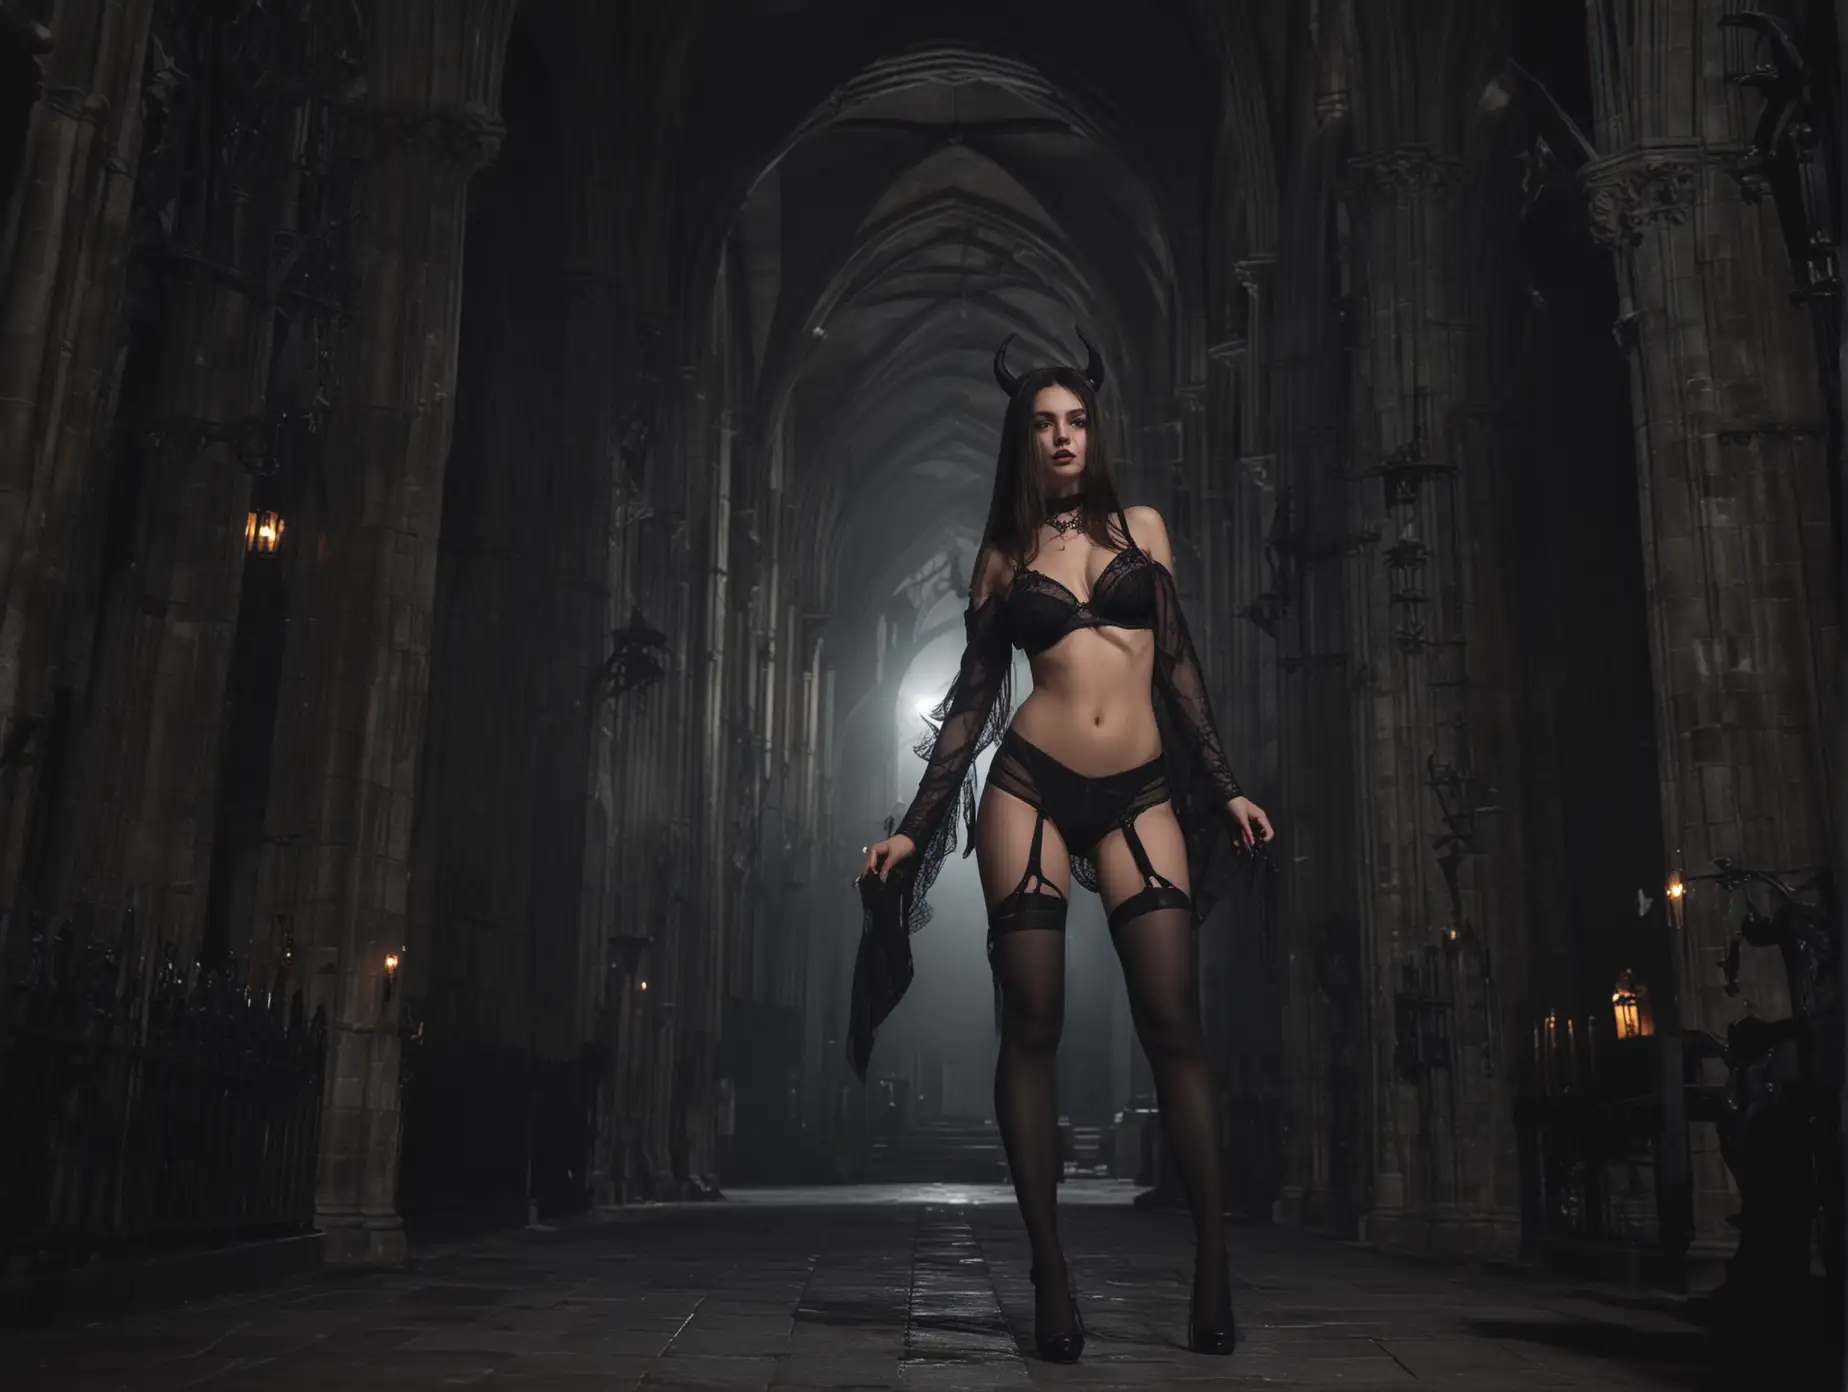 Dark Temptation Woman Devil in Black Stockings at Night Cathedral